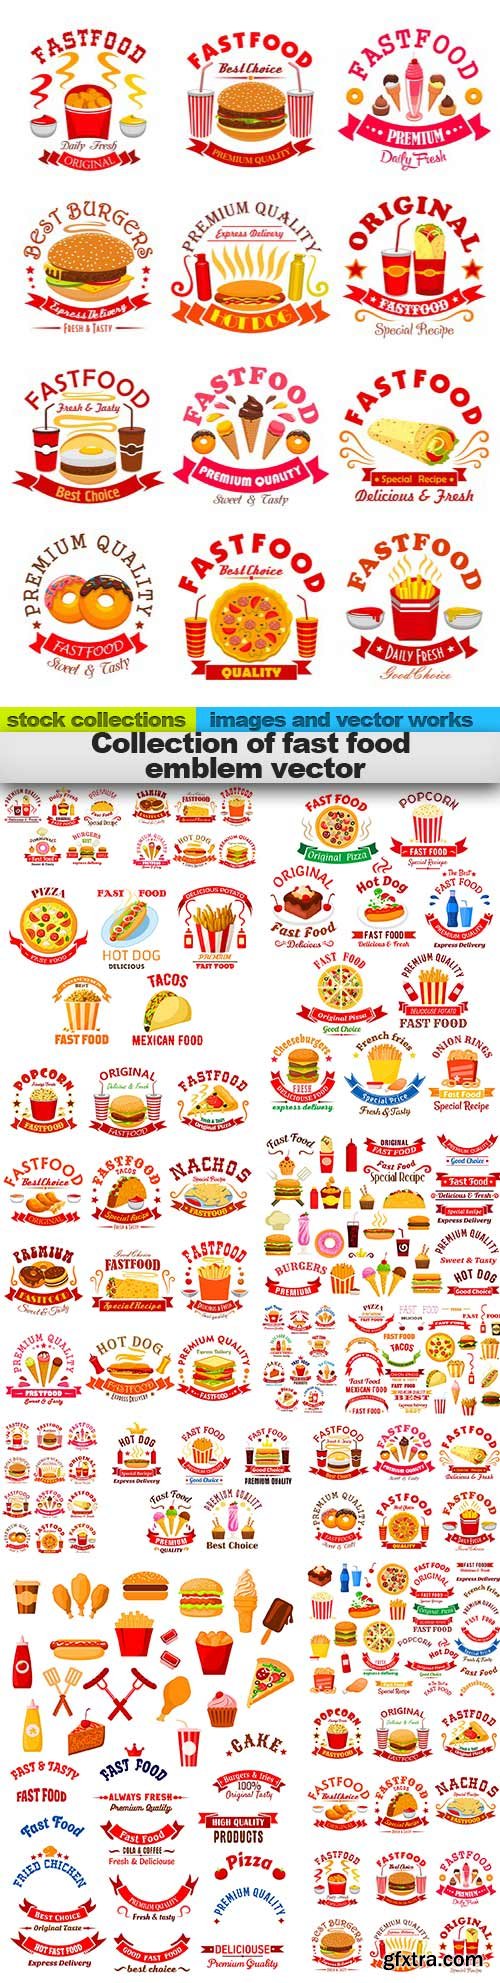 Collection of fast food emblem vector, 15 X EPS